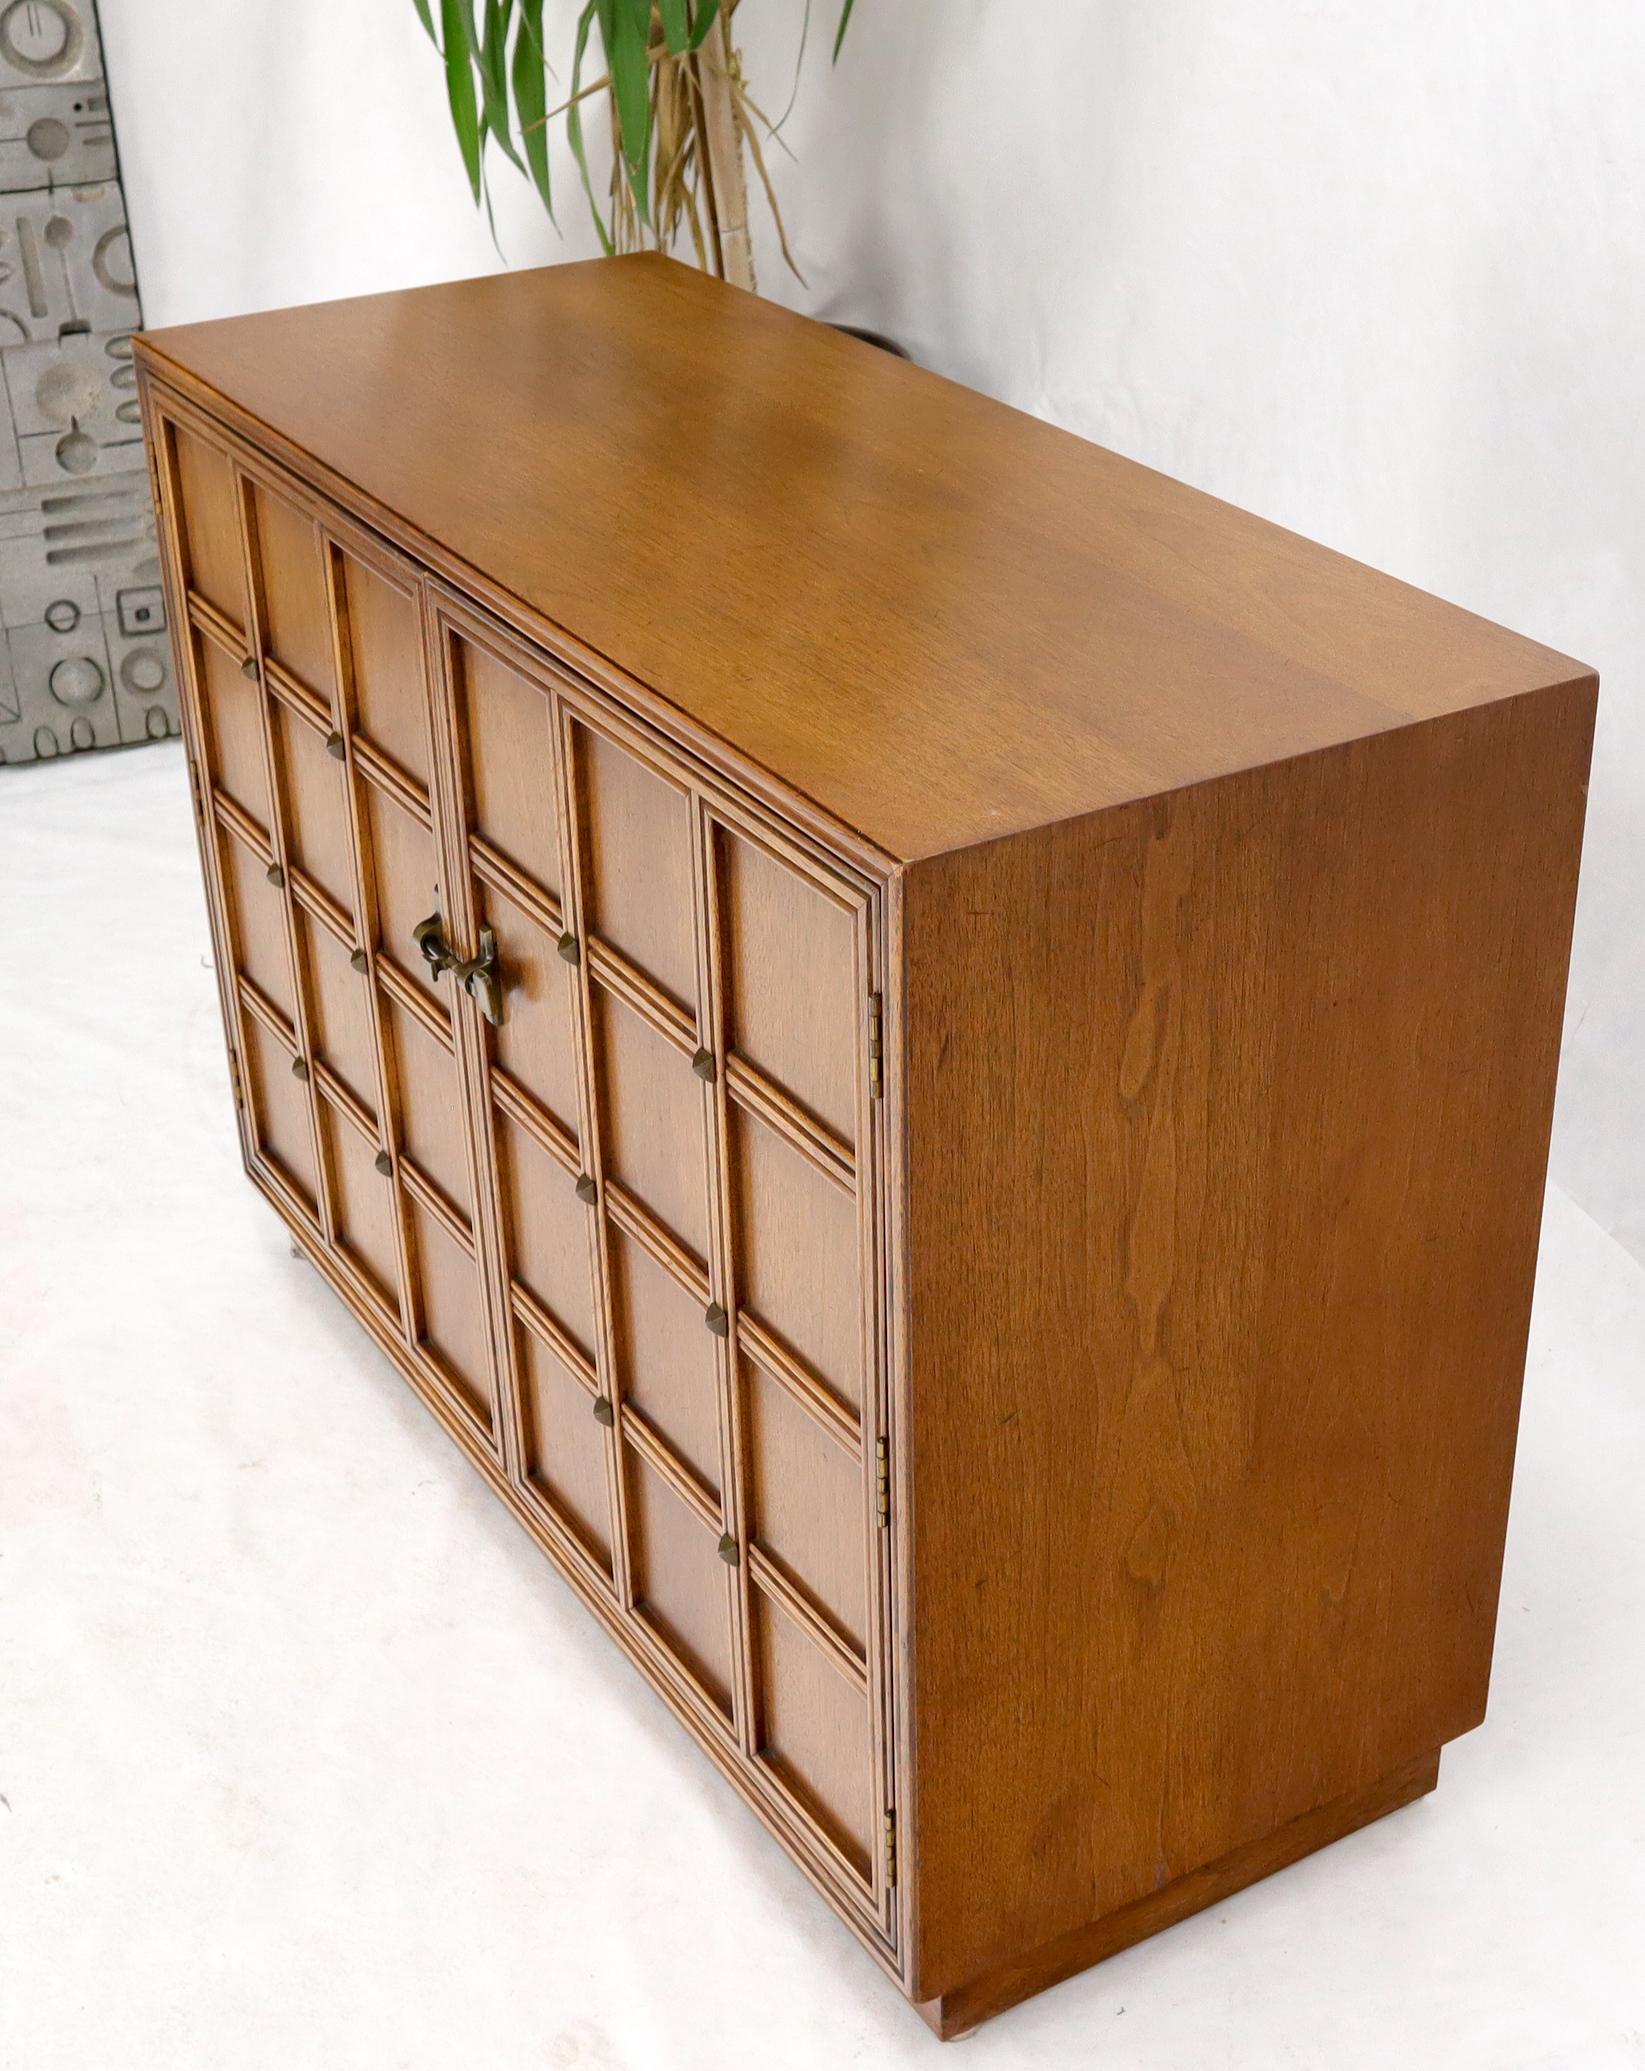 Mid-Century Modern lattice and studs front two doors credenza cabinet server or console. Very decorative high quality piece built by Henredon.